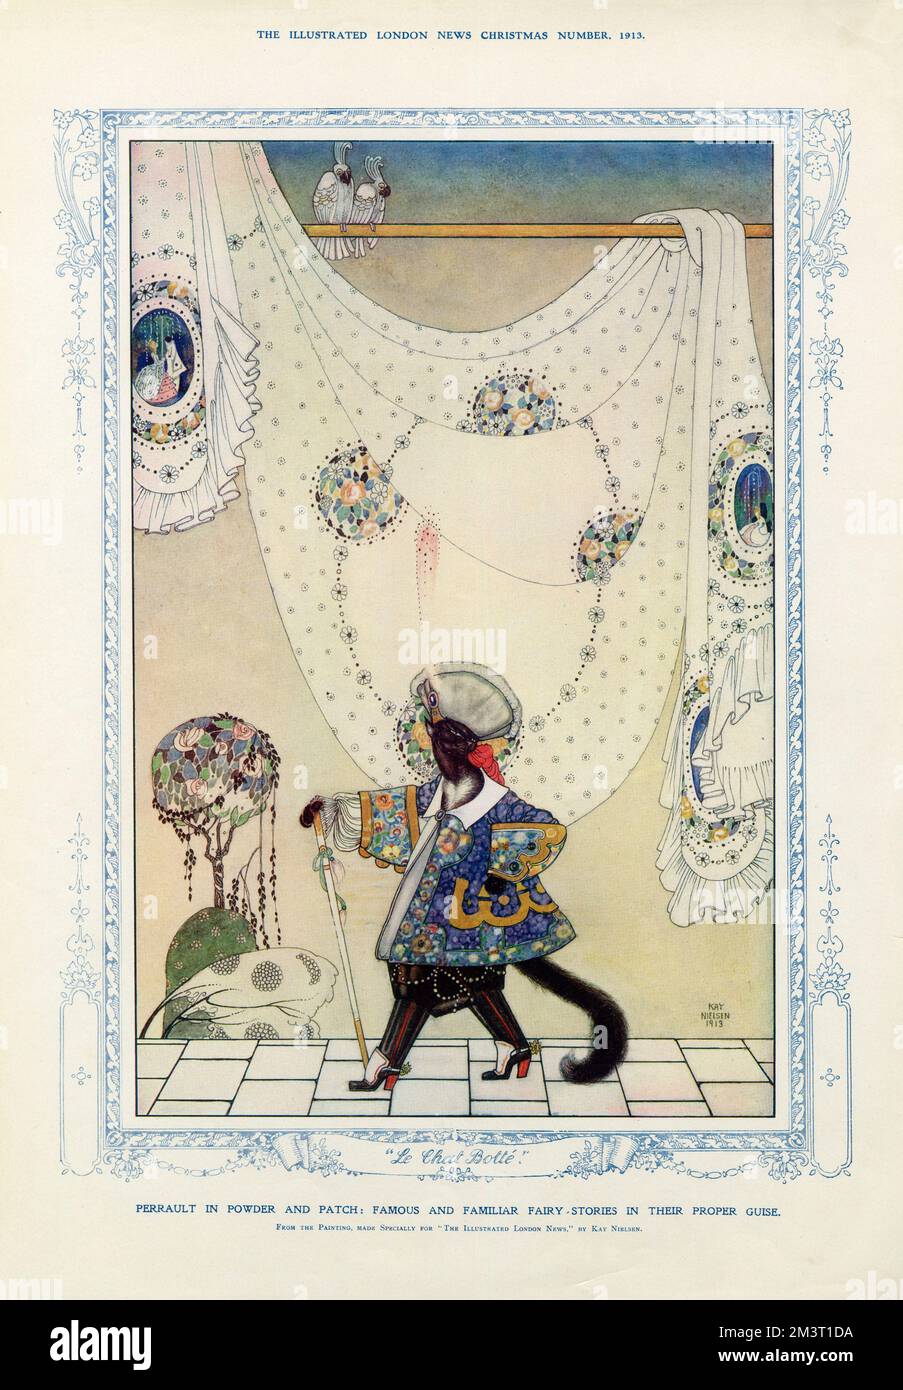 Perrault in Powder and Patch - Famous and Familiar fairy stories in their proper guise - The Master Cat or the Puss in Boots (Le Chat Botte) - from the painting by Kay Nielsen made specially for The Illustrated London News. Stock Photo